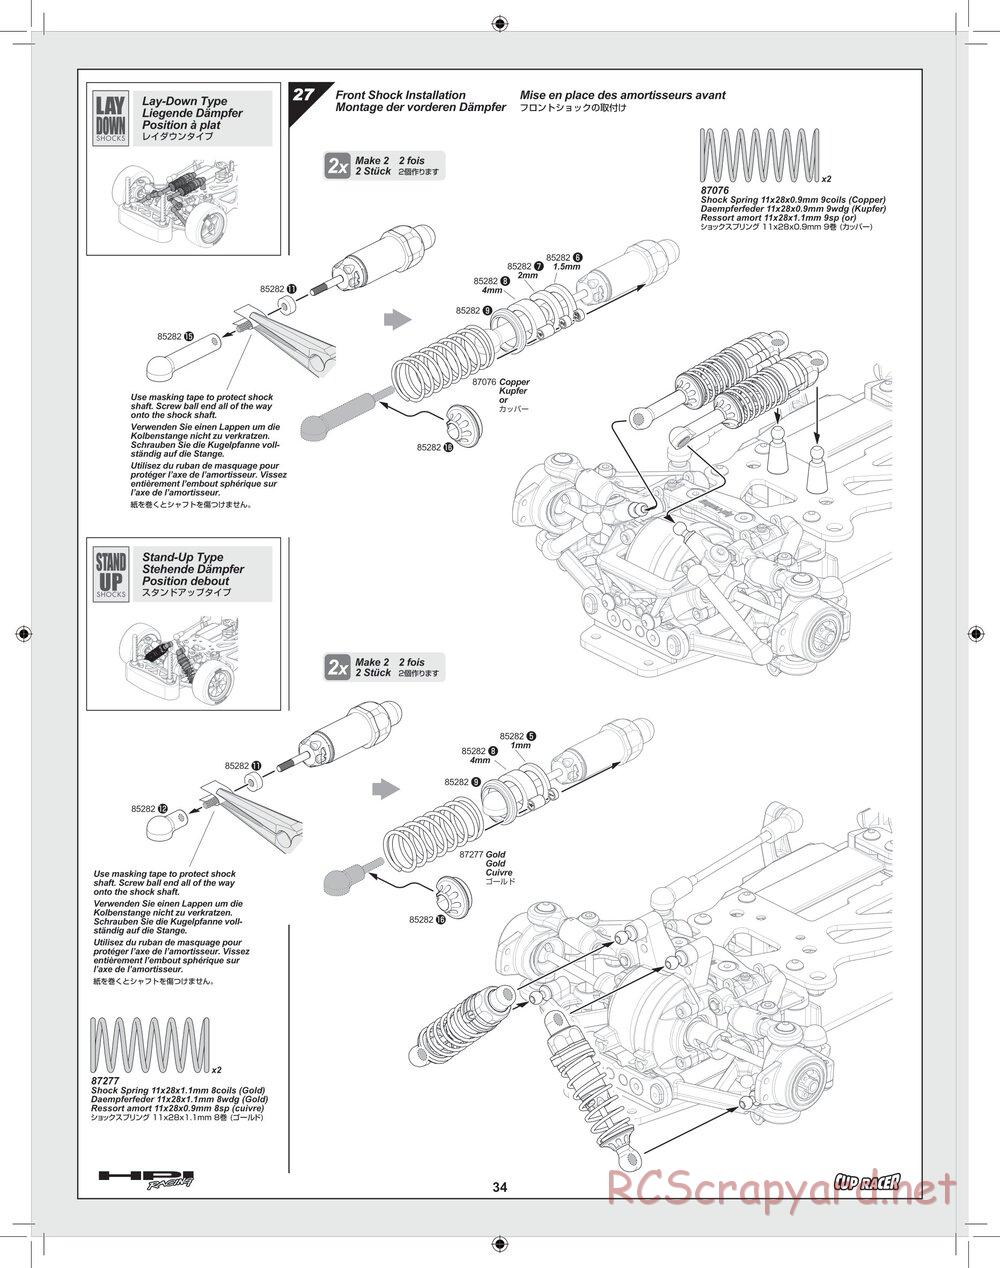 HPI - Cup Racer - Manual - Page 34